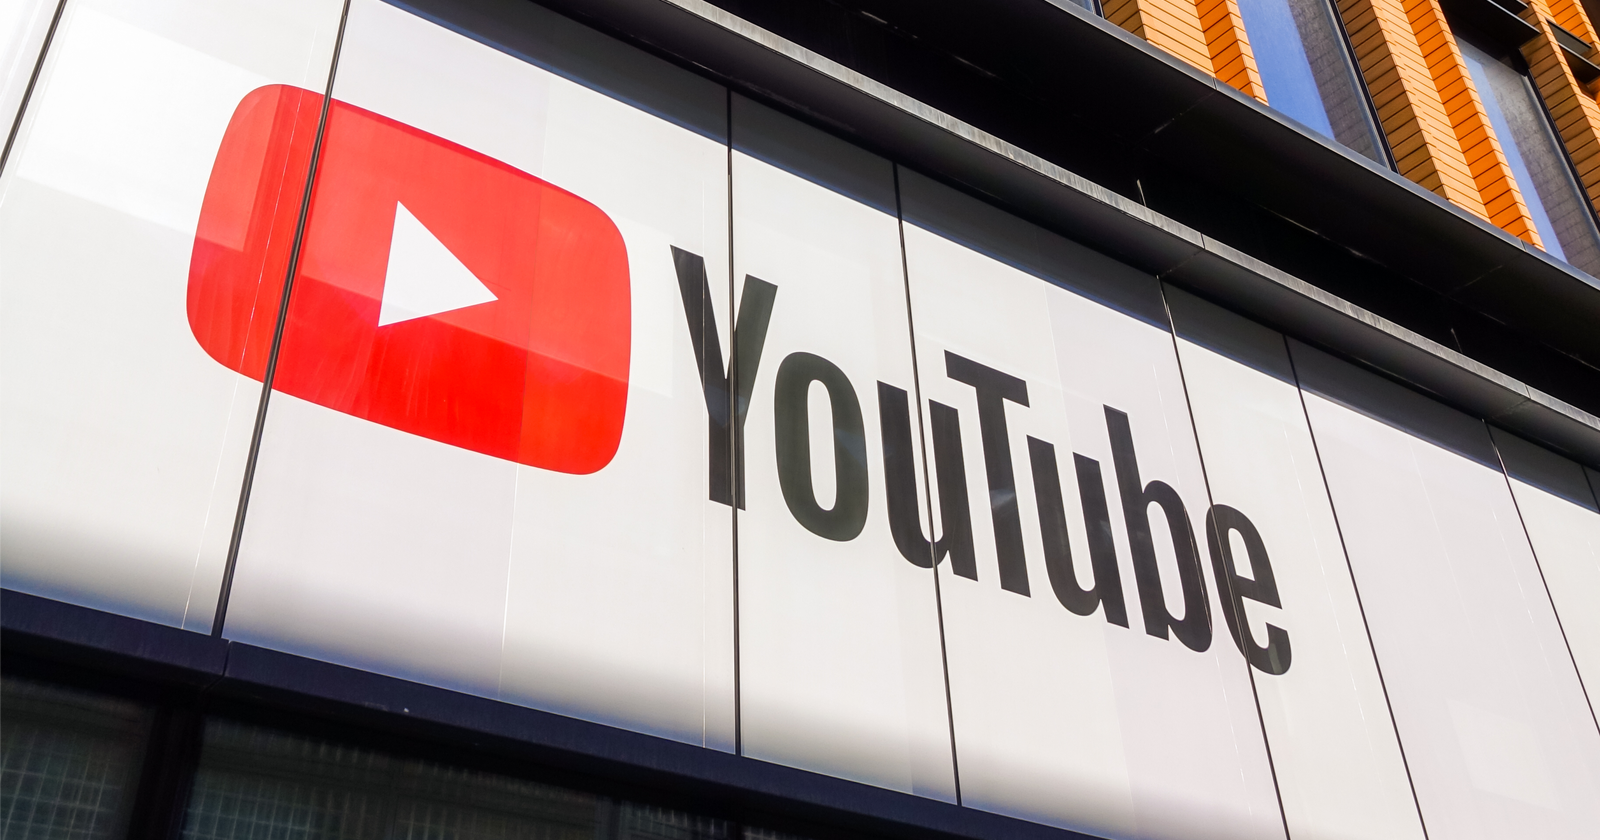 YouTube Rolls Out Automatic Live Captions to All Channels